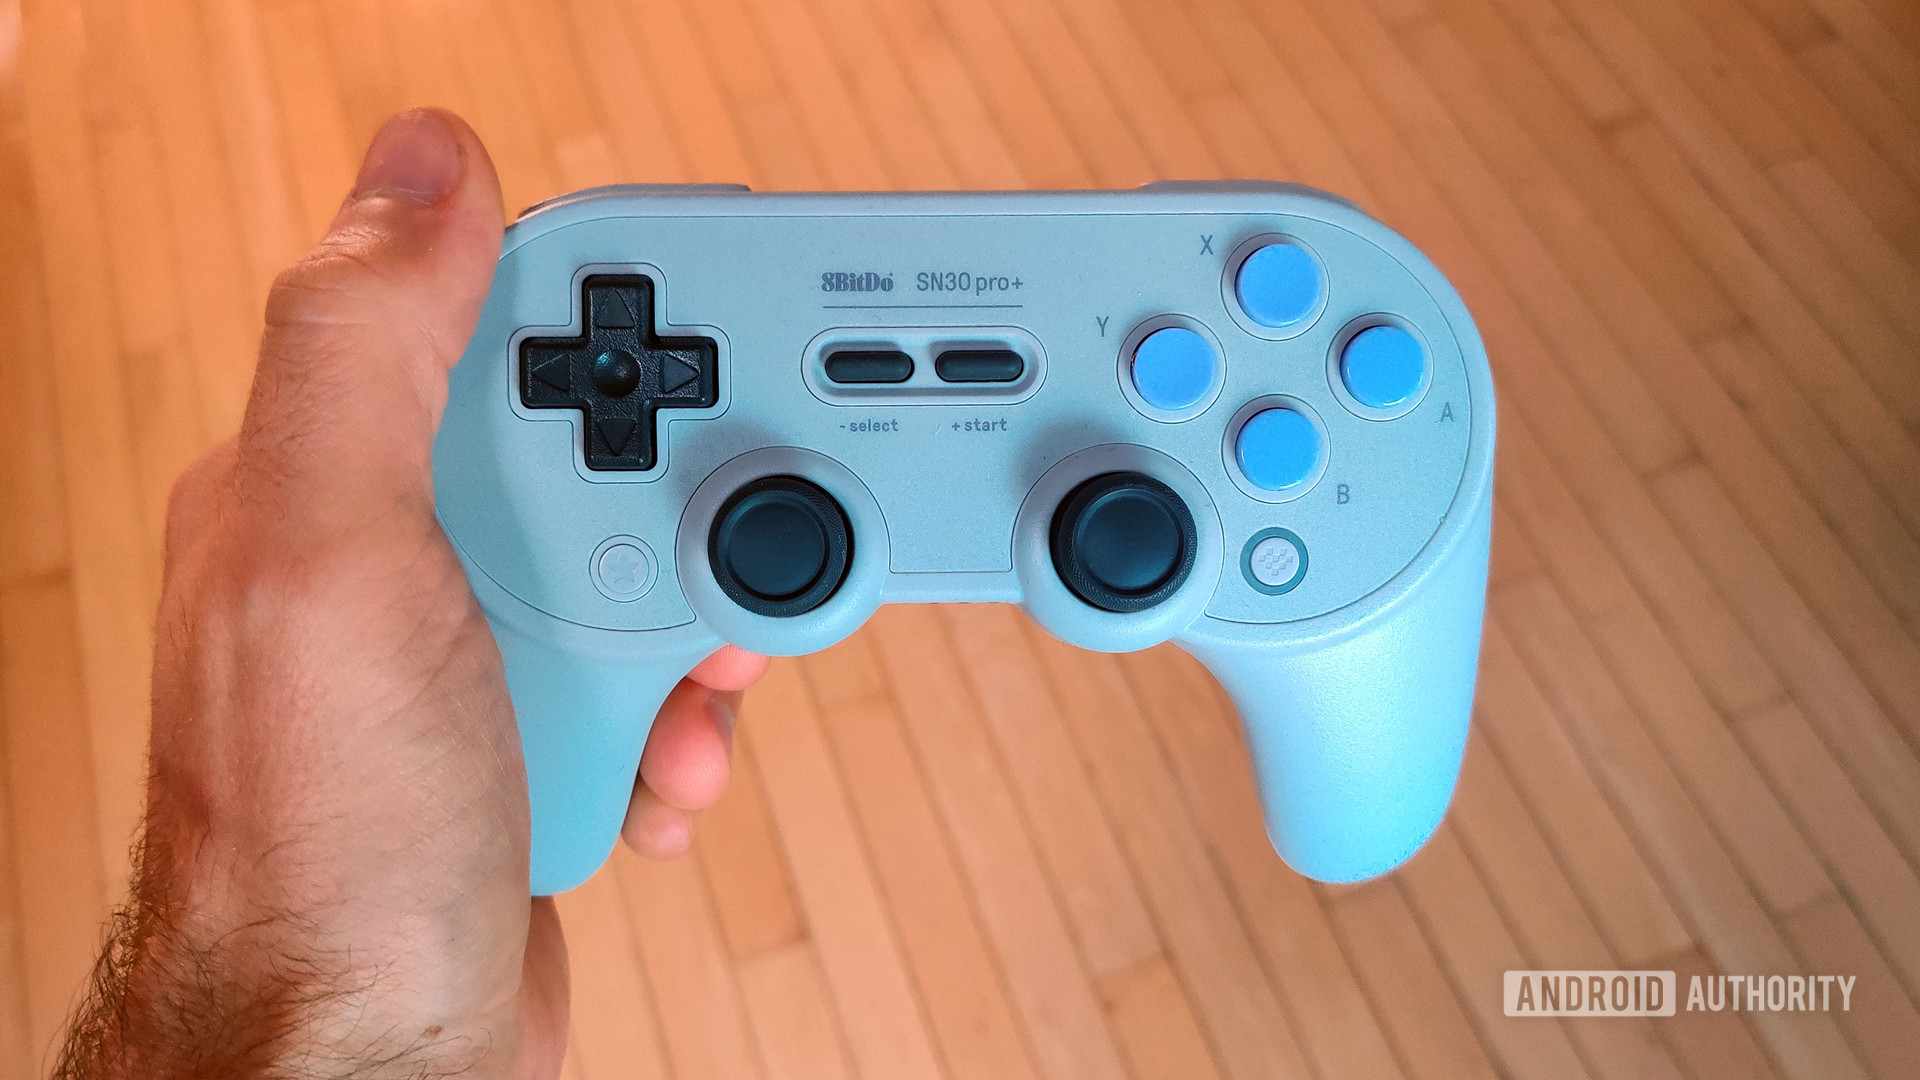 8bitdo SN30 Pro Plus review: So much to love - Android Authority